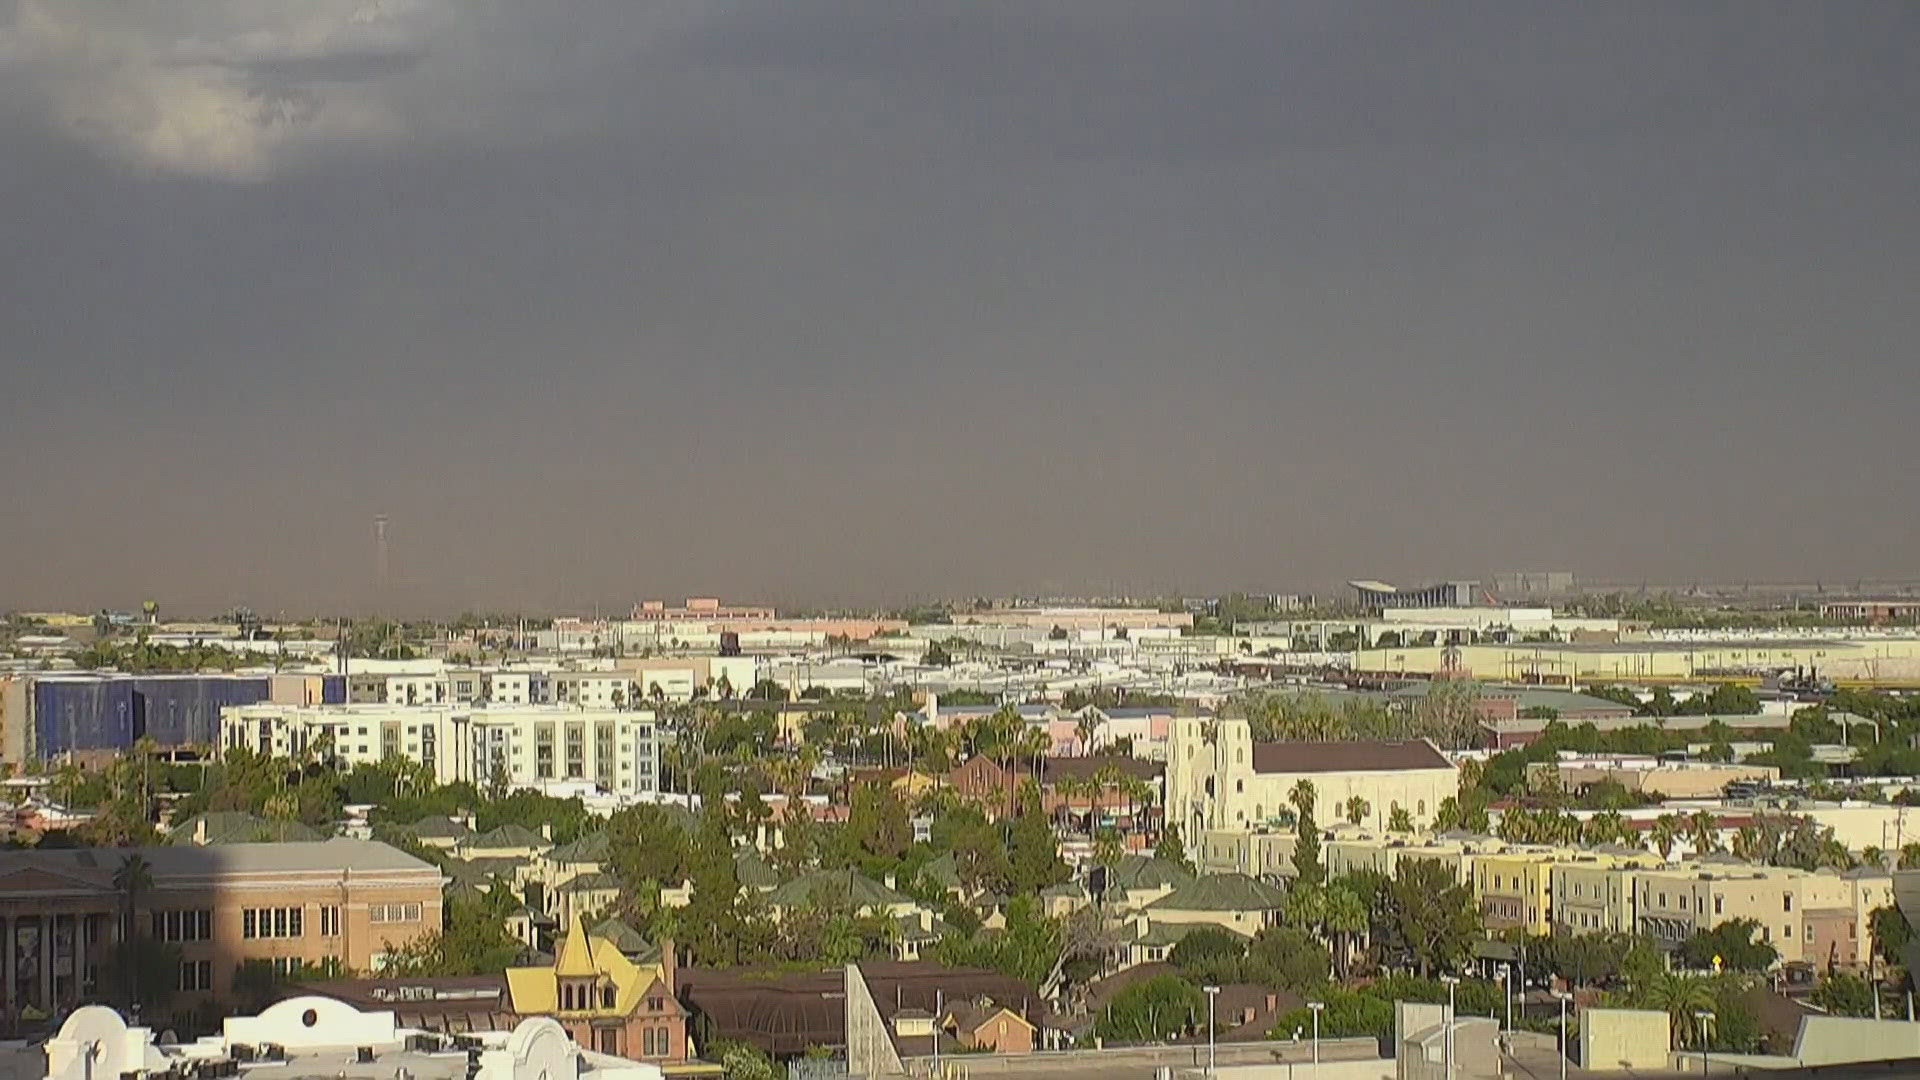 12News meteorologist Lindsay Riley has the latest on storms moving through the Valley.